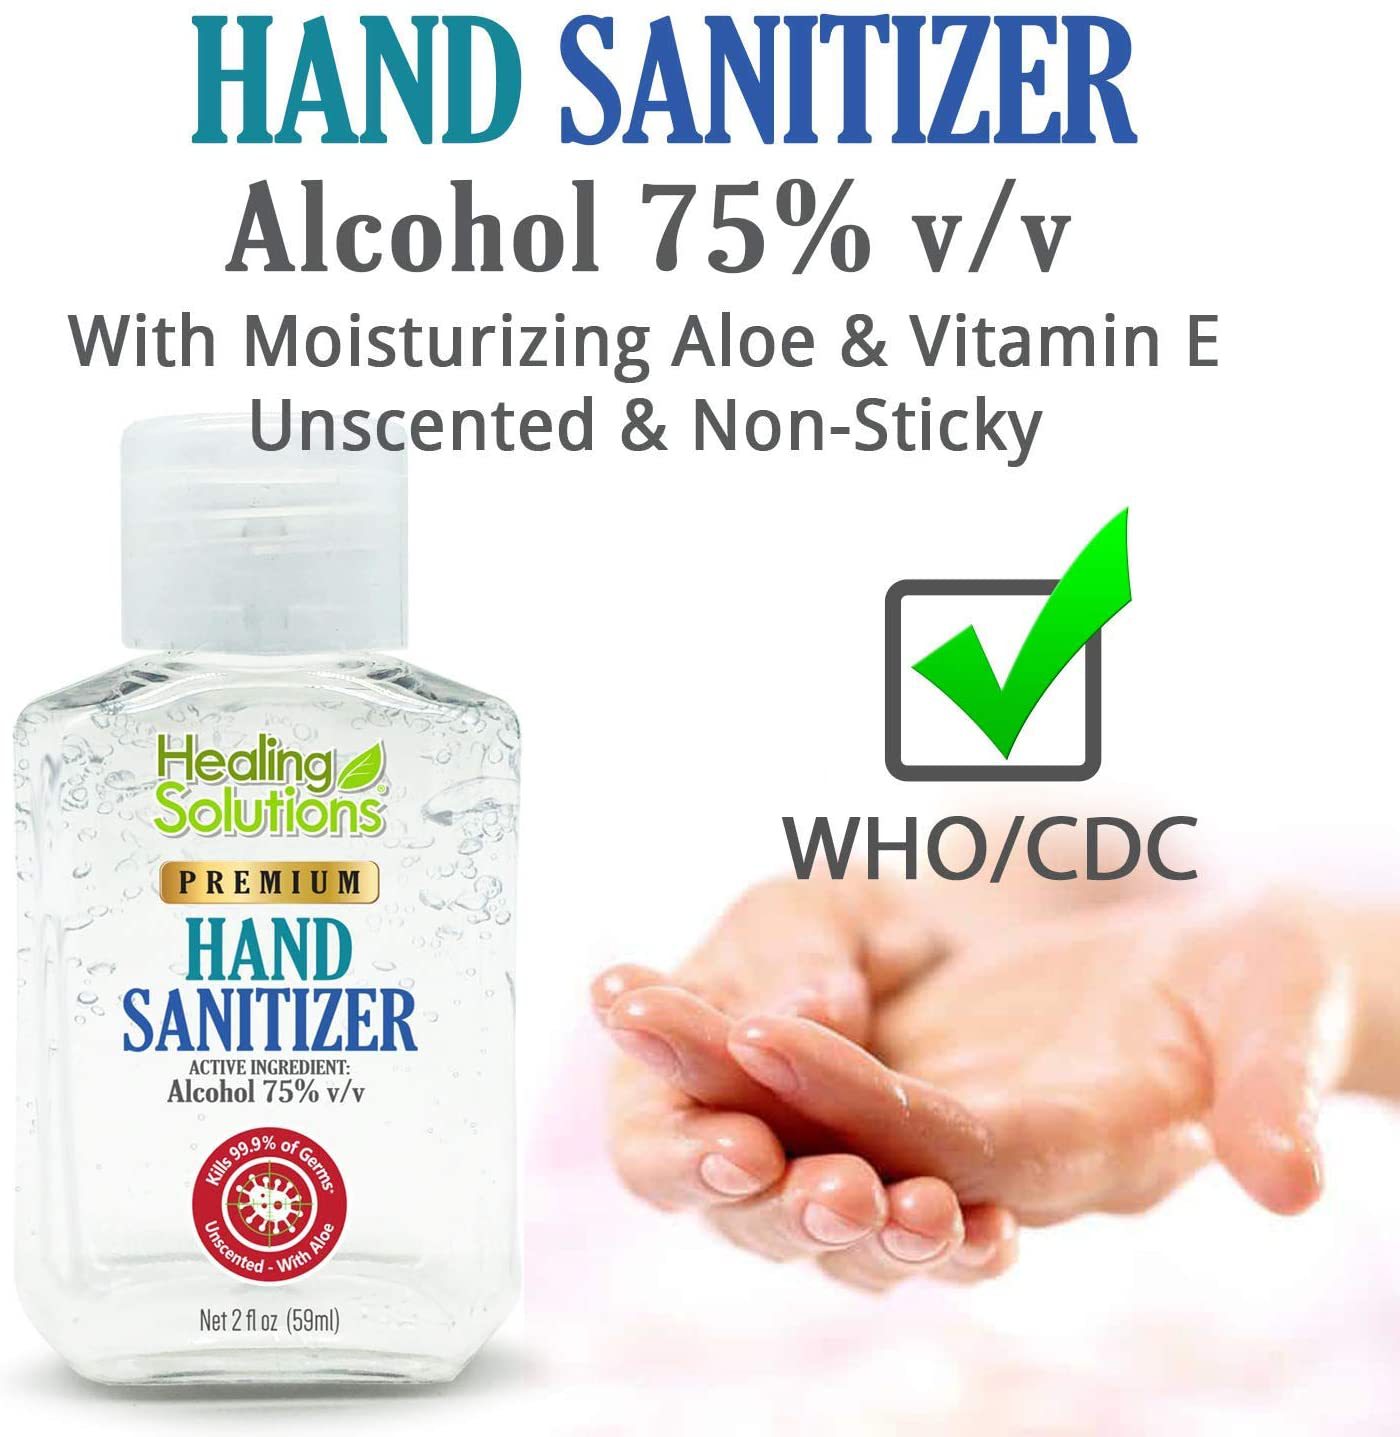 Hand Sanitizer Gel (Mini 2 oz Bottle) - 75% Alcohol - Kills 99.99% of Germs - Small 2oz Travel Size Individual Personal Pocket 2 Ounce Bottles